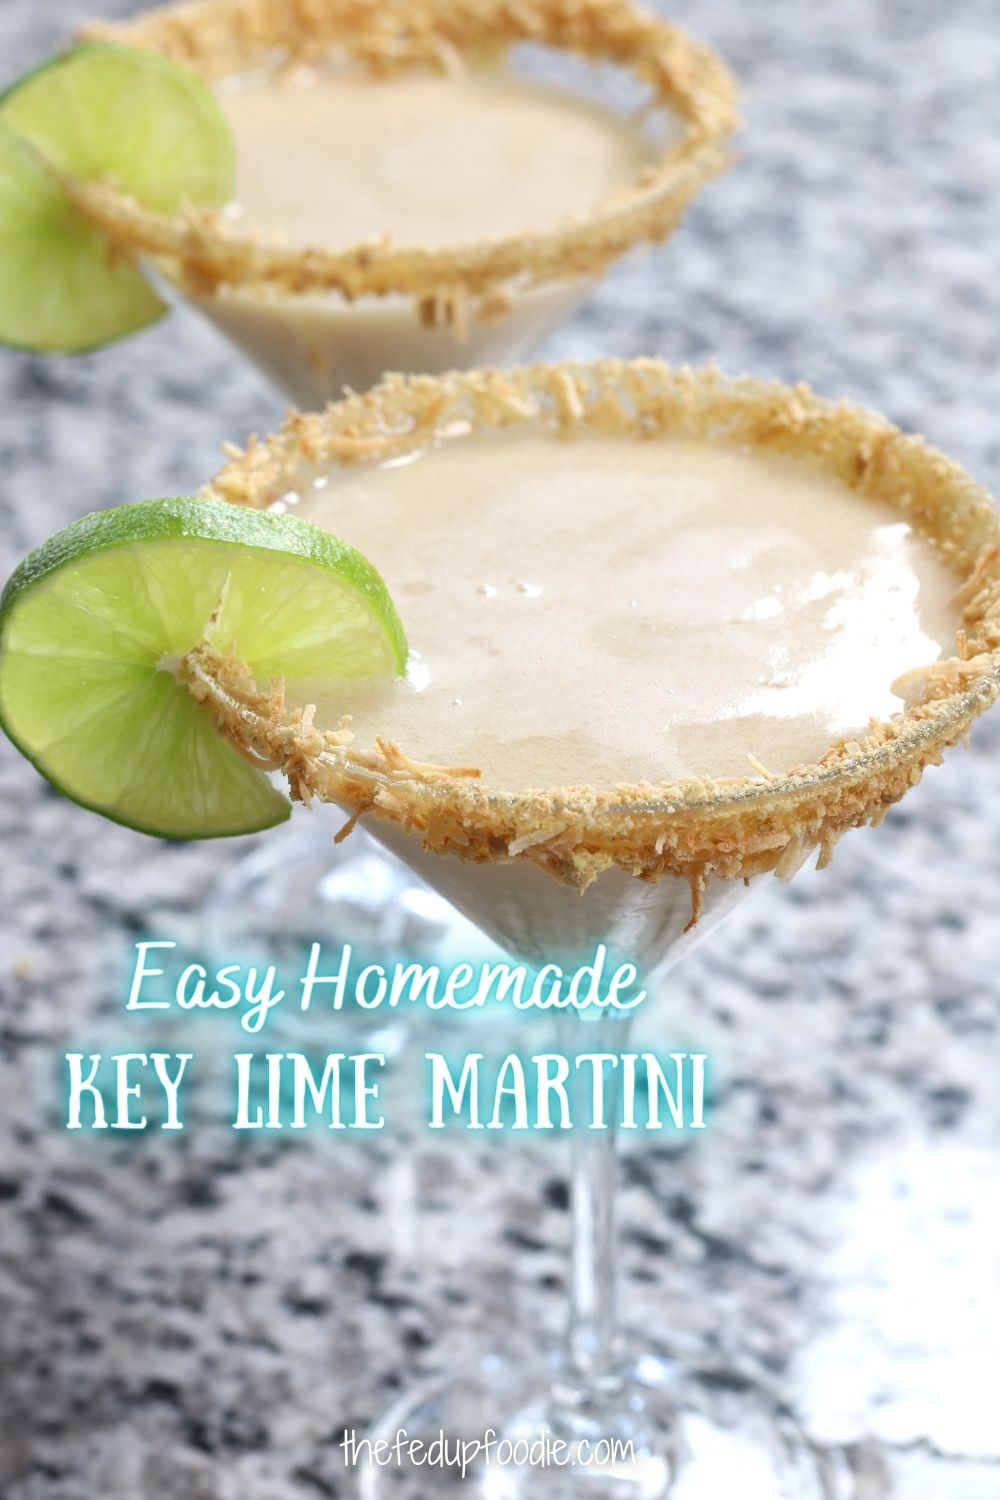 This Key Lime Martini recipe is creamy, tangy and incredibly refreshing. Made with dark rum, vanilla vodka and key lime juice, this is an easy cocktail to enjoy for summer, New Year's Eve or as a treat for citrus lovers. 
#KeyLimeMartini #KeyLimeMartiniRecipe #KeyLimeMartiniRecipeVanillaVodka #EasyKeyLimeMartini #CoconutKeyLimeMartini #KeyLimePieMartini #KeyLimePieMartiniRecipe